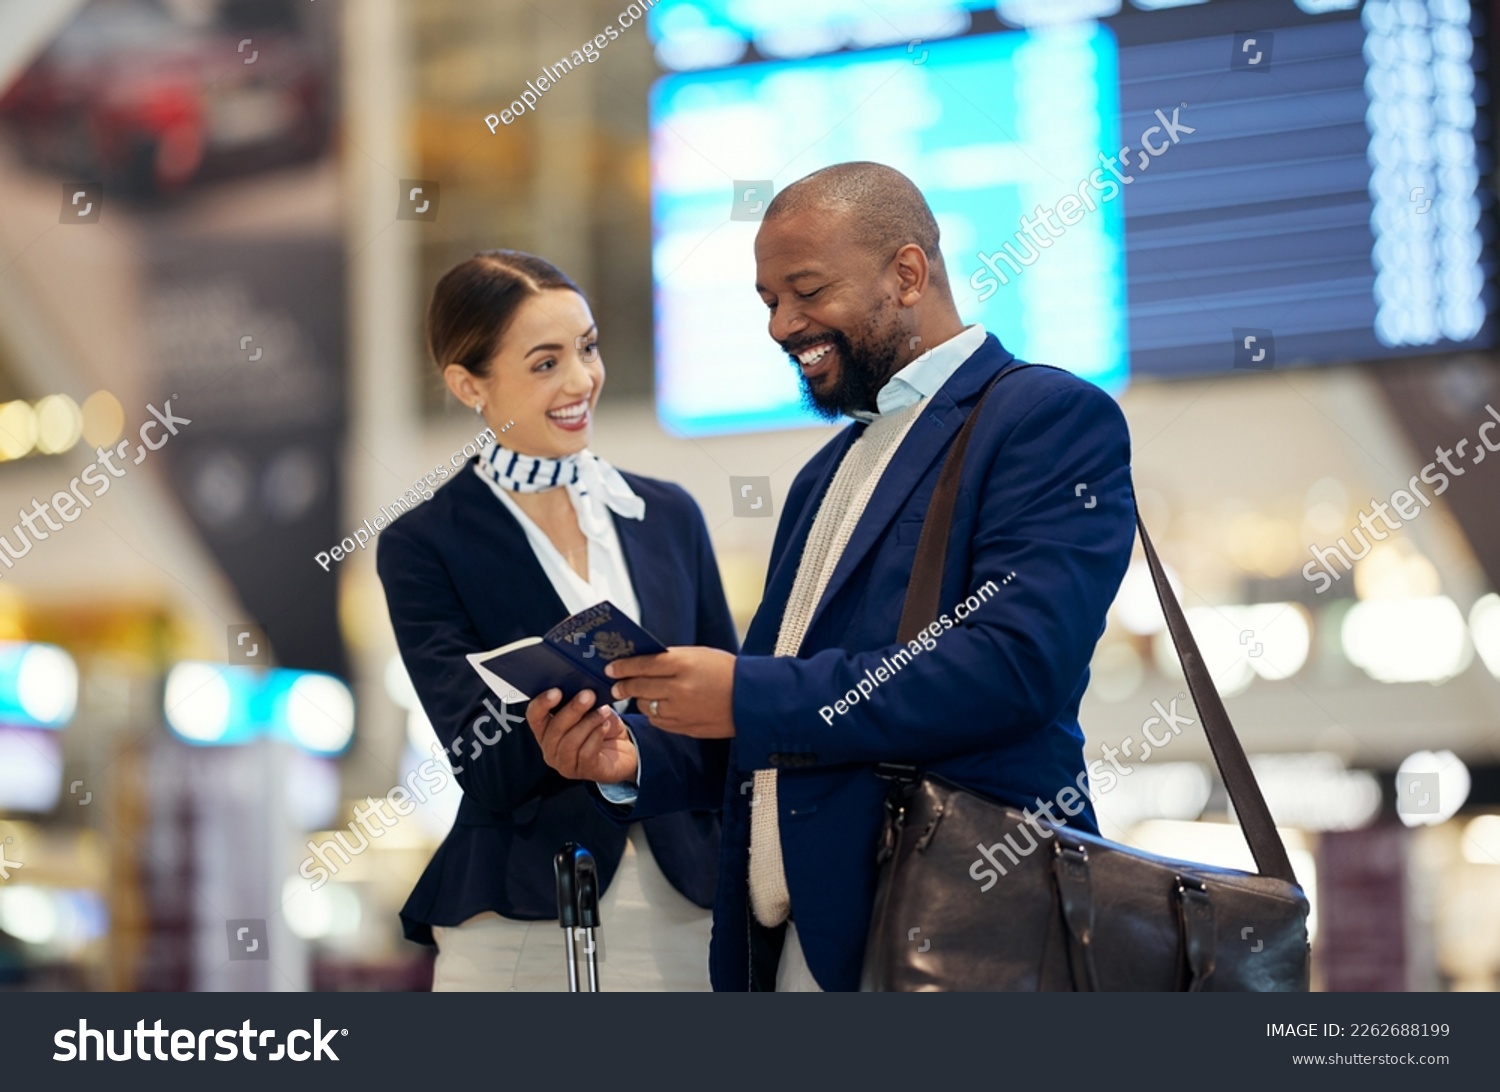 Businessman, airport and passenger assistant helping traveler in departure, flight time or passport information. Black male with female airline service agent for advice on travel, directions or FAQ #2262688199